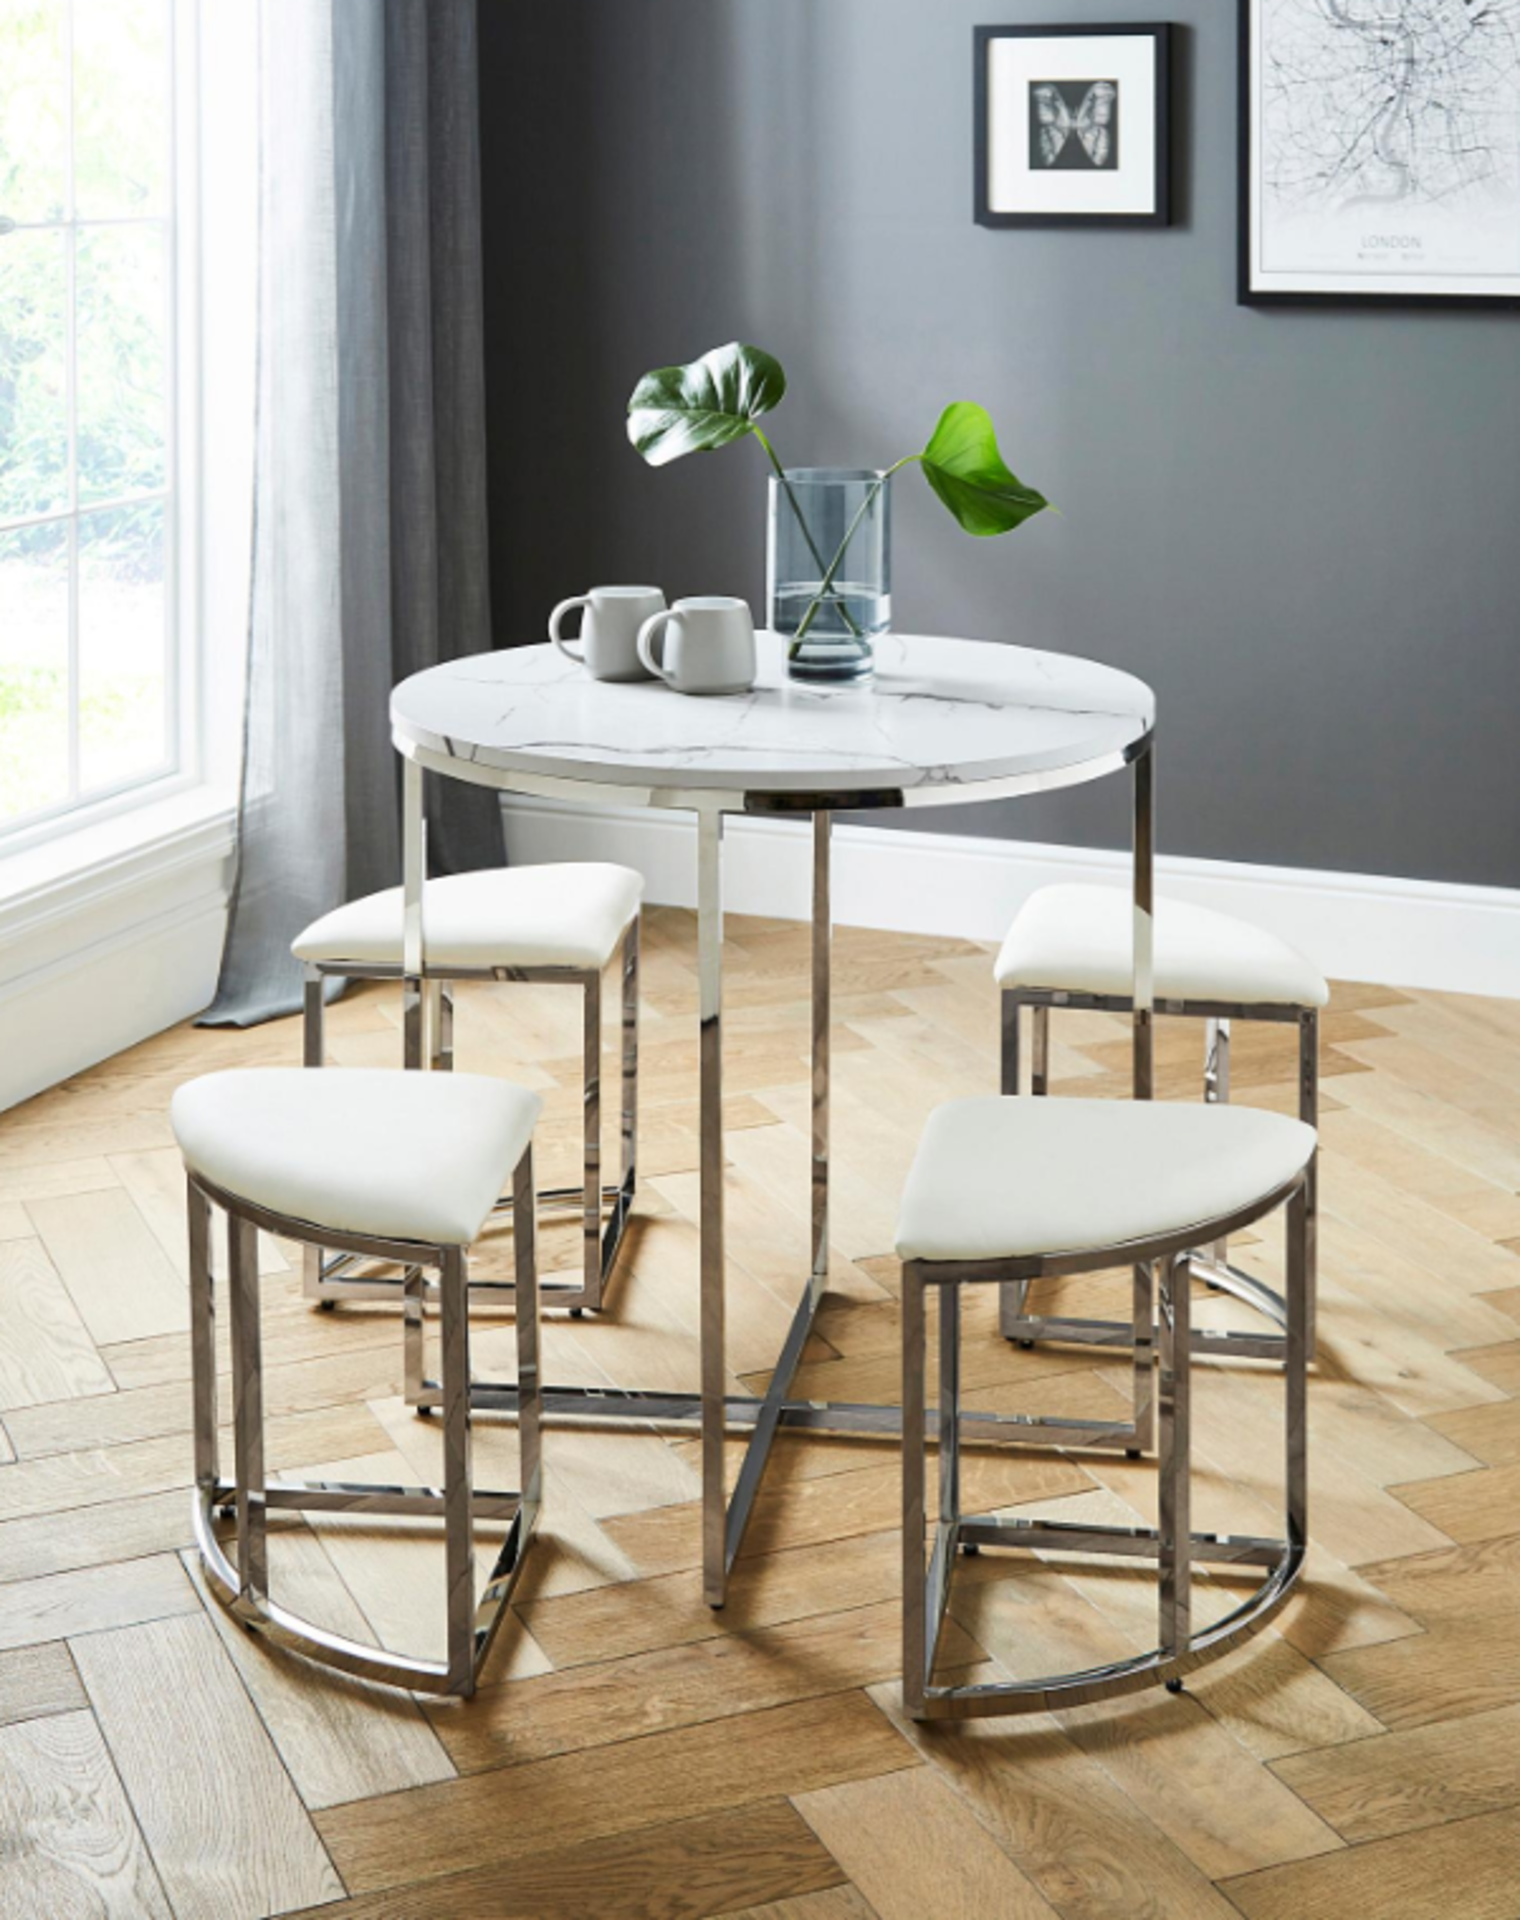 New & Boxed Milan Hideaway Space Saving Dining Sets. RRP £399 each. If you’re looking for a dining